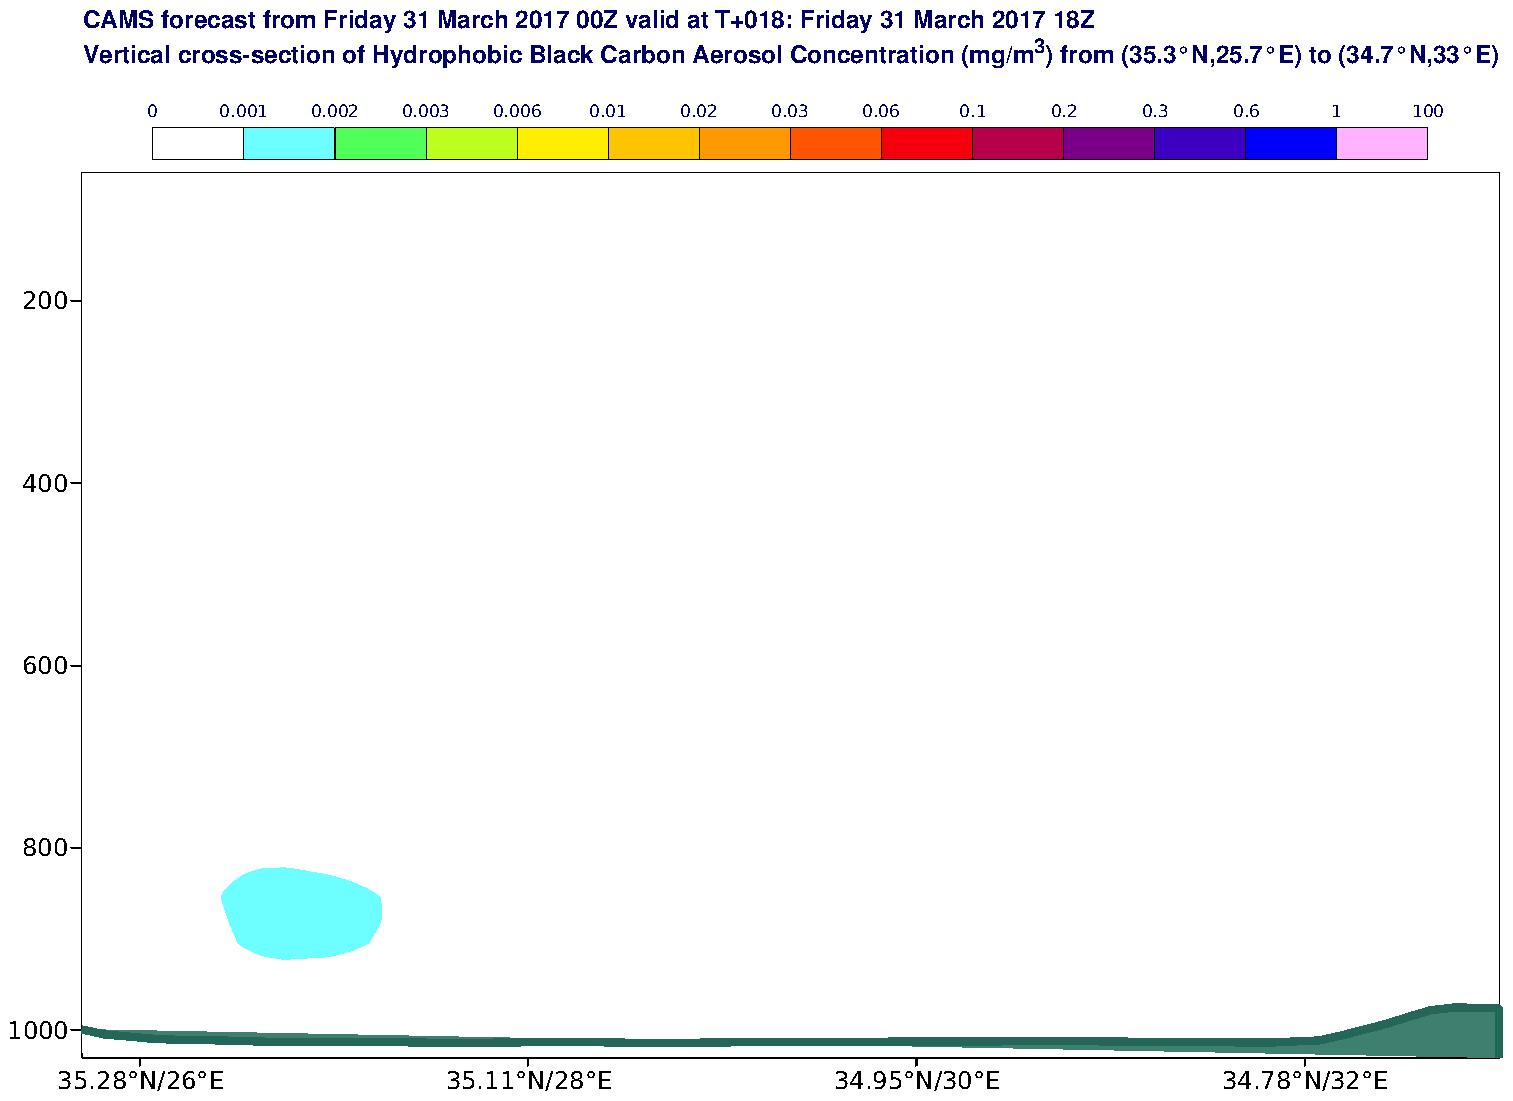 Vertical cross-section of Hydrophobic Black Carbon Aerosol Concentration (mg/m3) valid at T18 - 2017-03-31 18:00